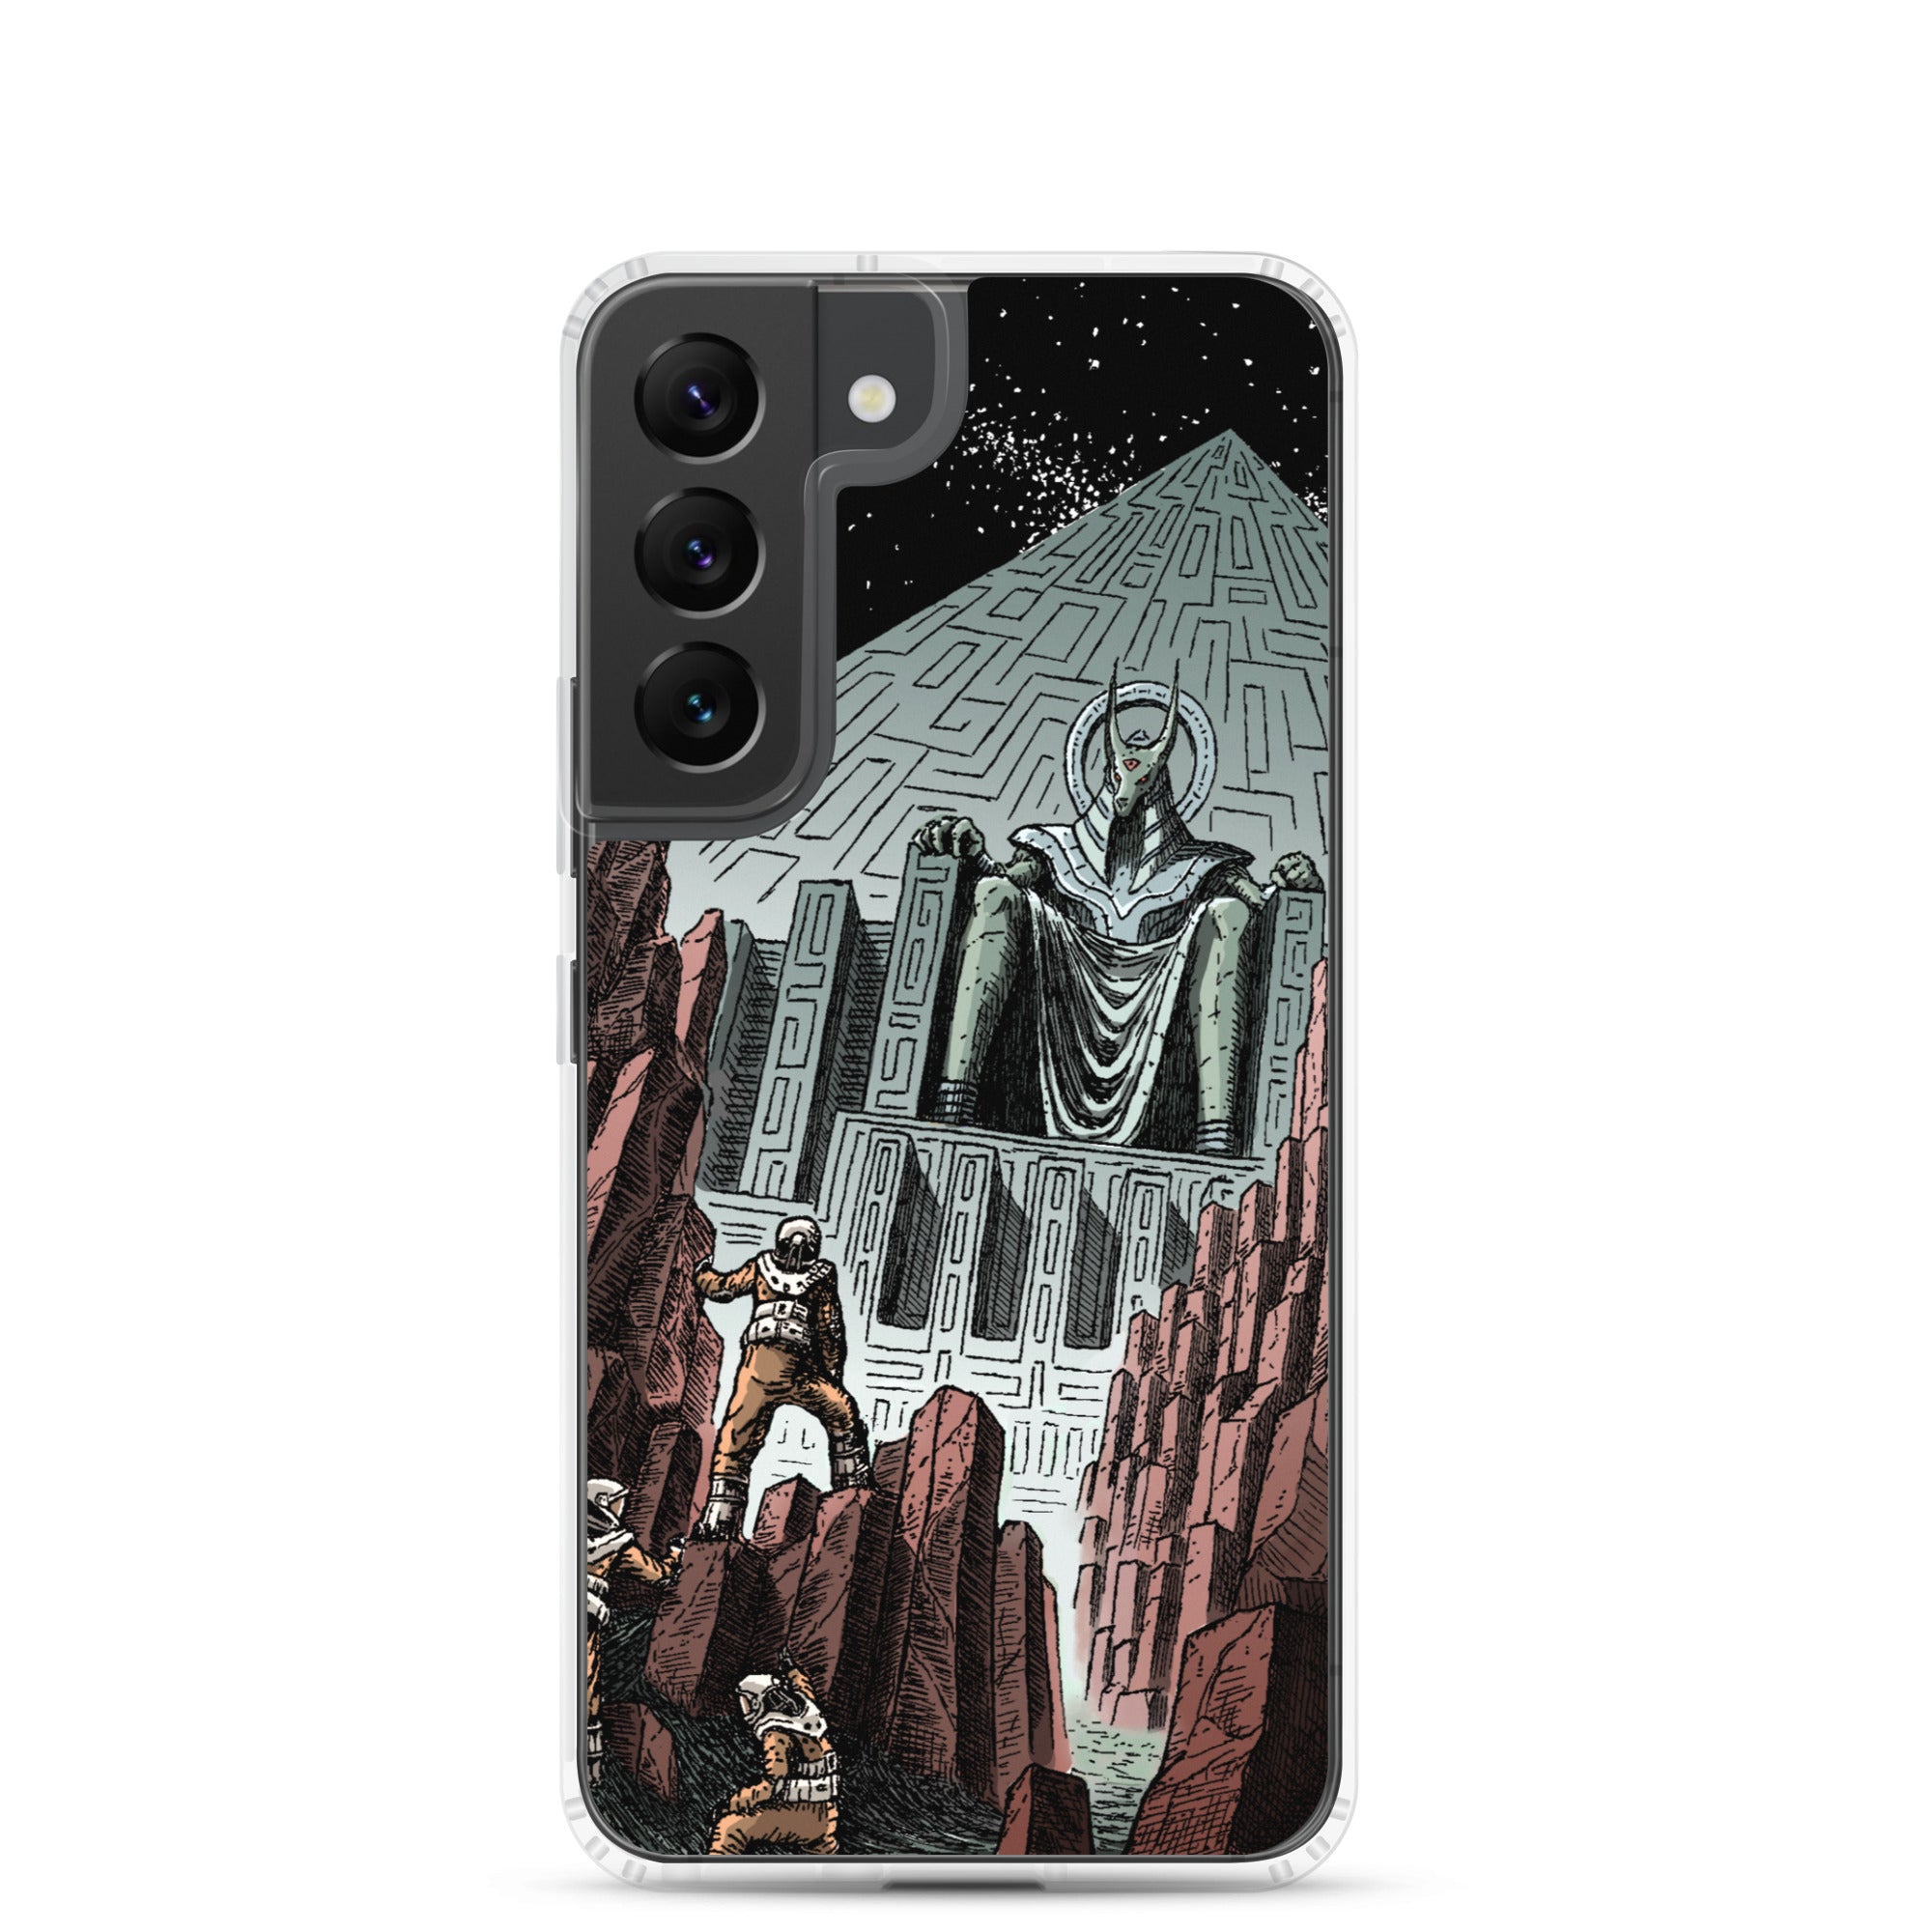 Samsung Case - The Ancient God